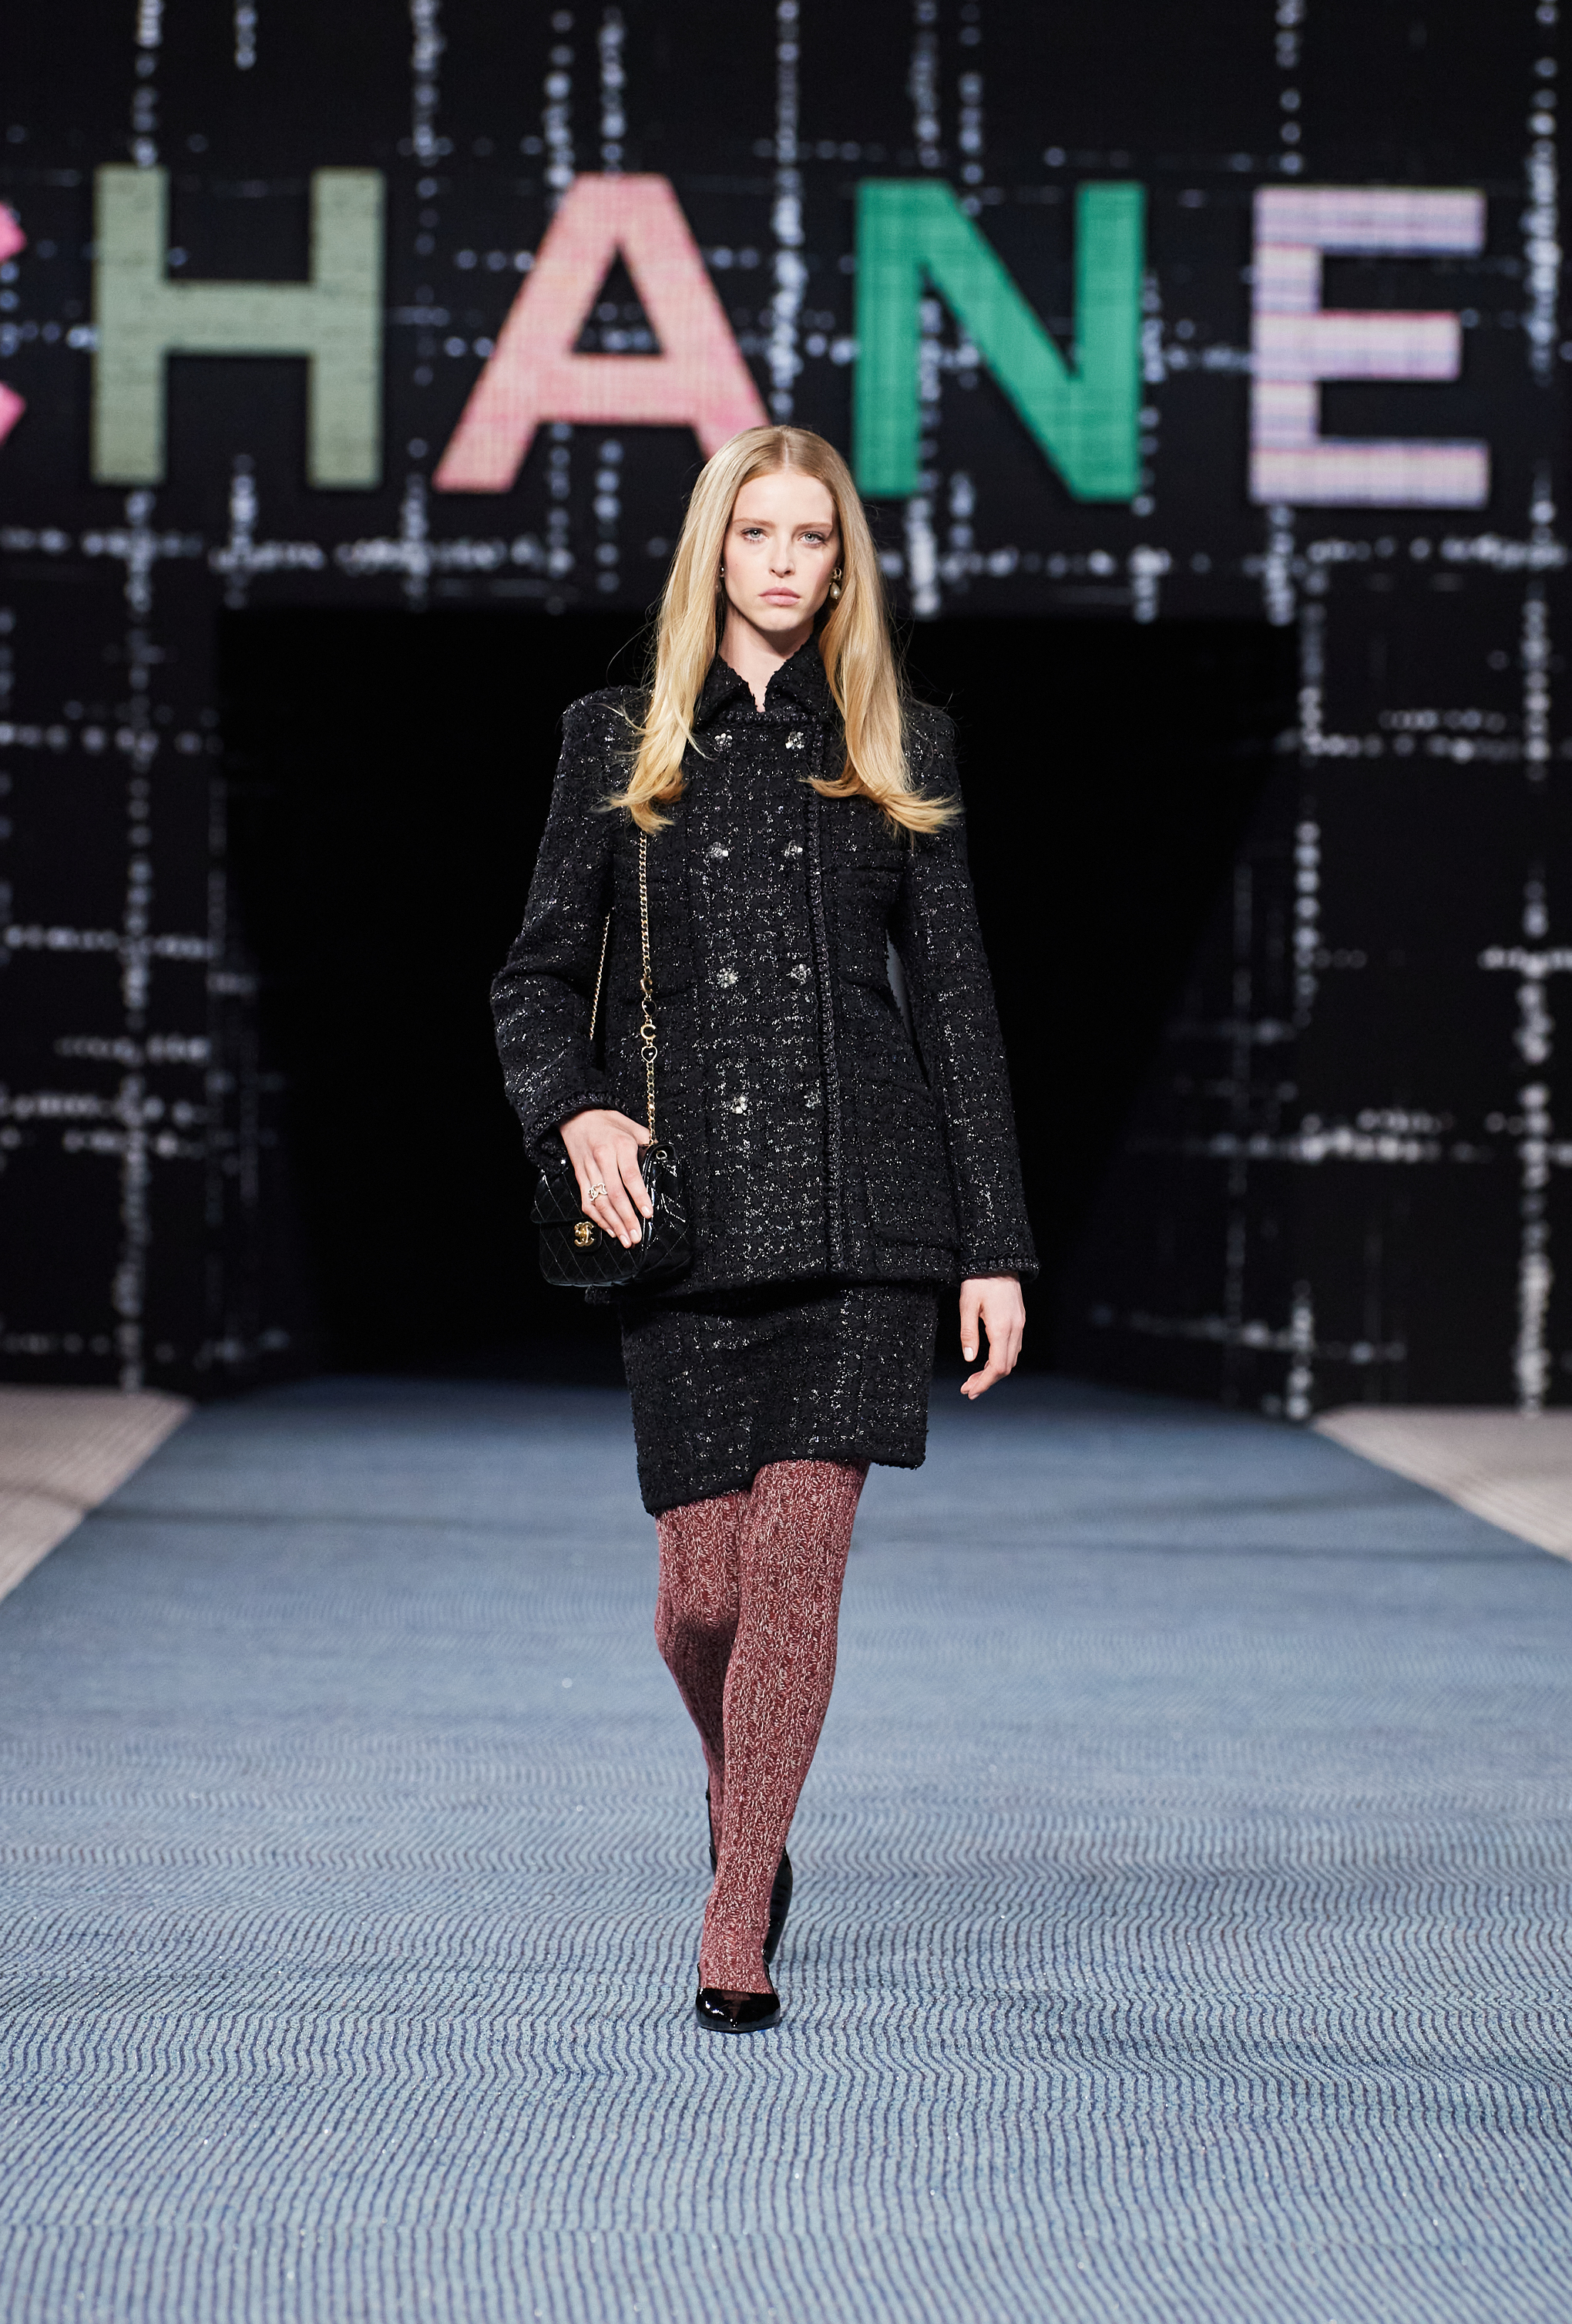 Chanel Logo Tights Are Here, and We're Obsessed